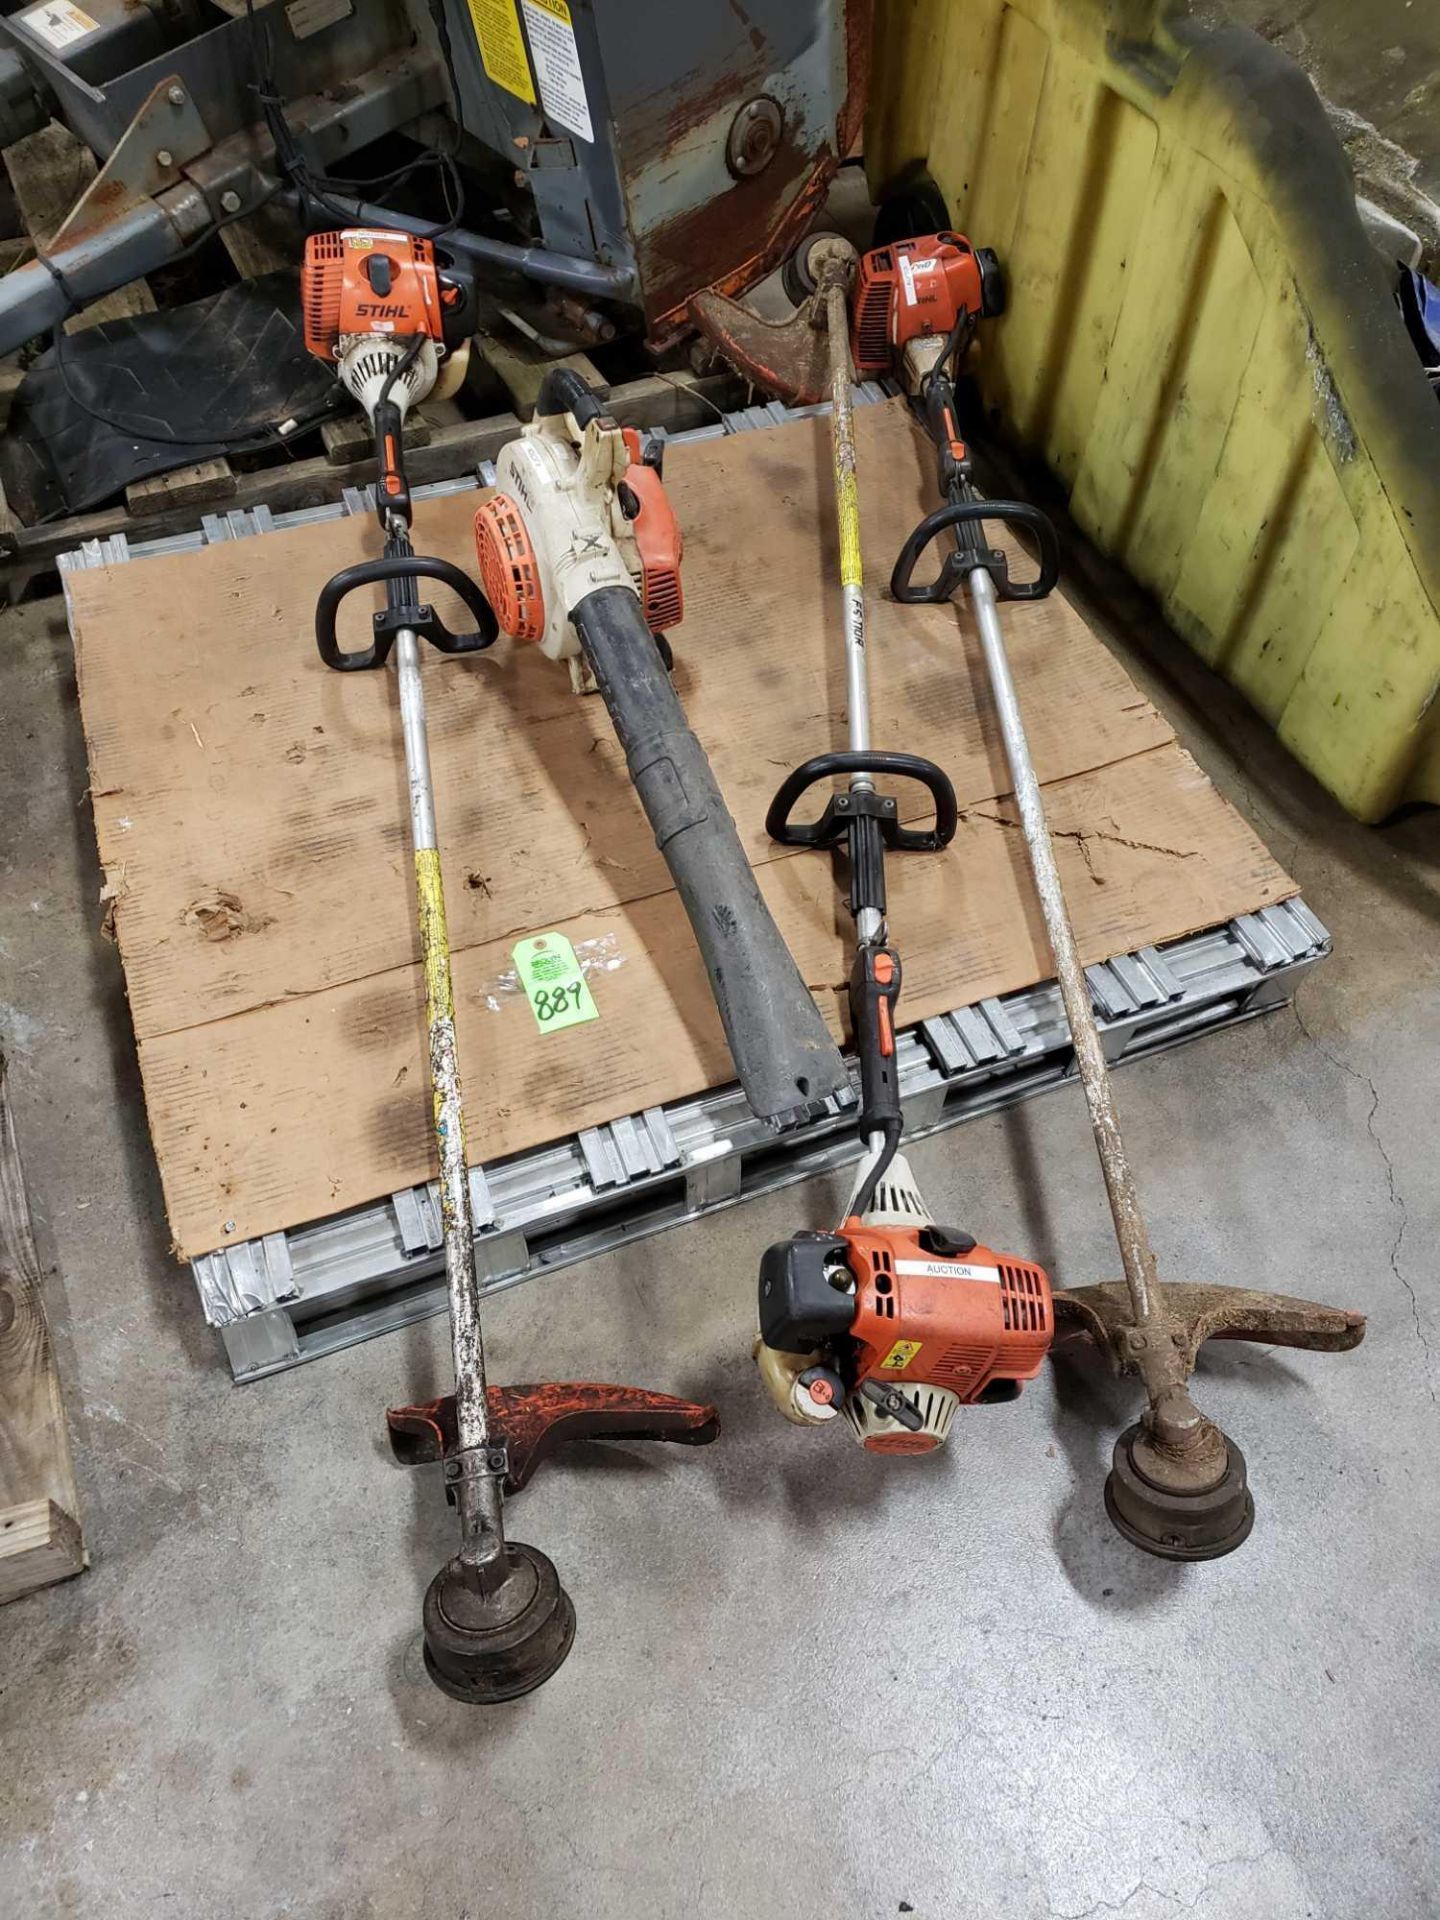 Assortment of Stihl trimmers and blower. Most will need carb work.